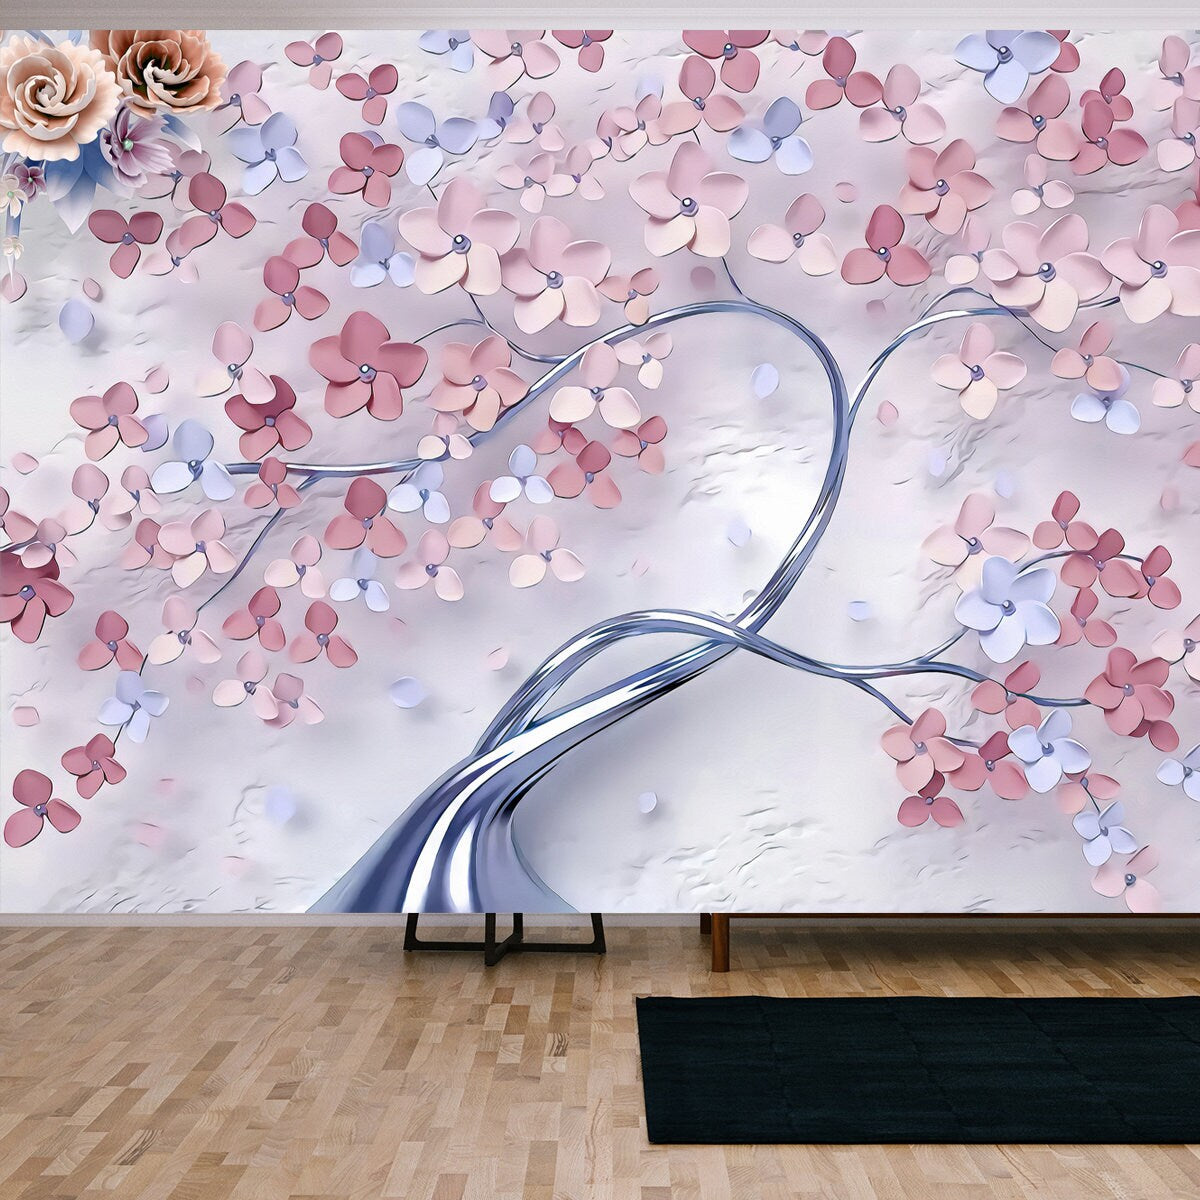 3D Wallpaper Luxury Tree and 3D Flower with Texture Background Wallpaper Living Room Mural